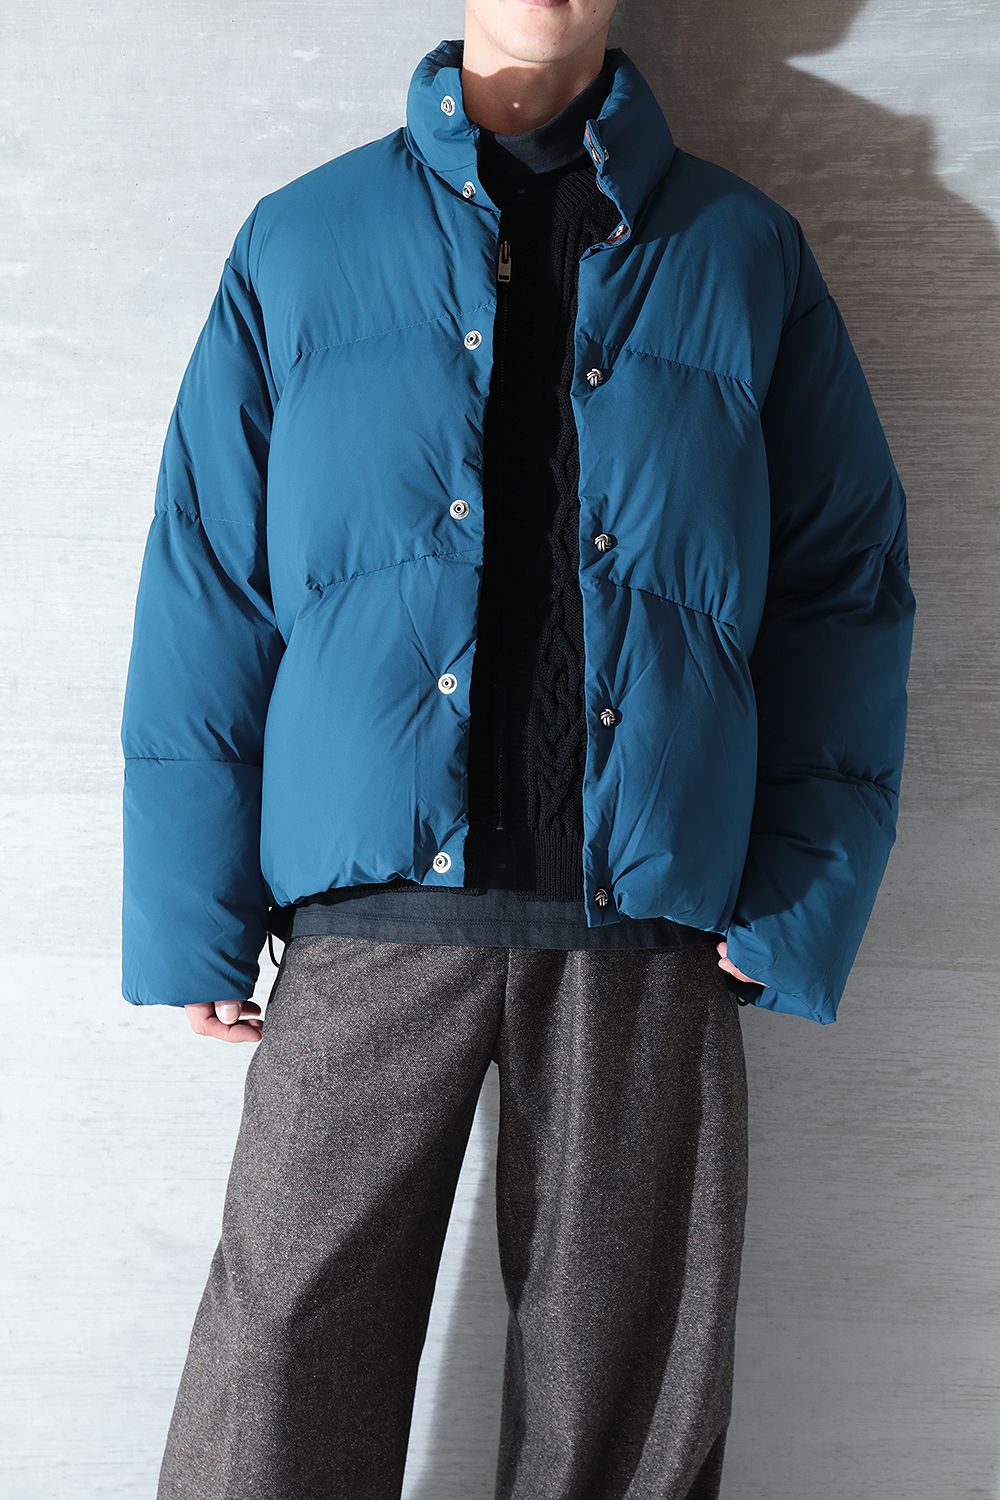 Acne Studios】21AW Delivery DIGEST #3 | Acacia ONLINESTORE